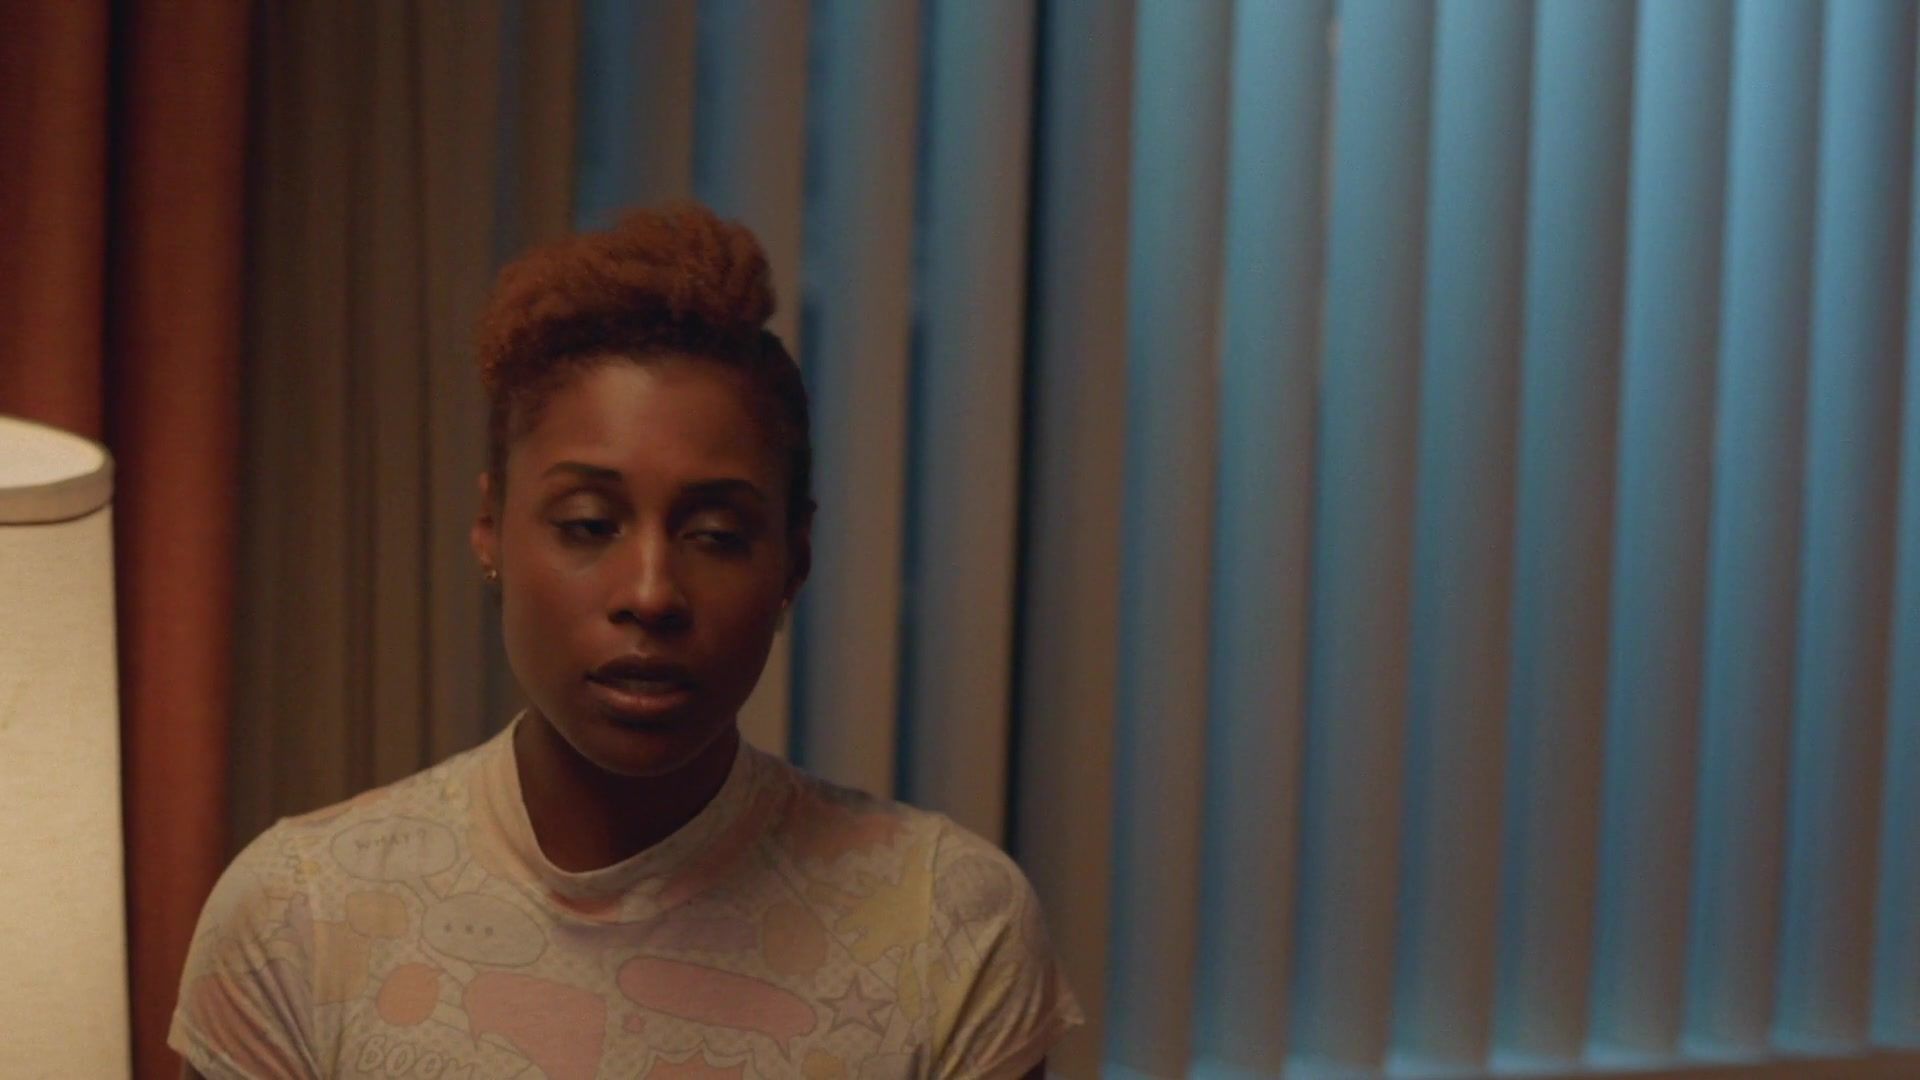 Roleplay Domnique Perry naked, Issa Rae Naked - Insecure s02e01 (2017) Rabo